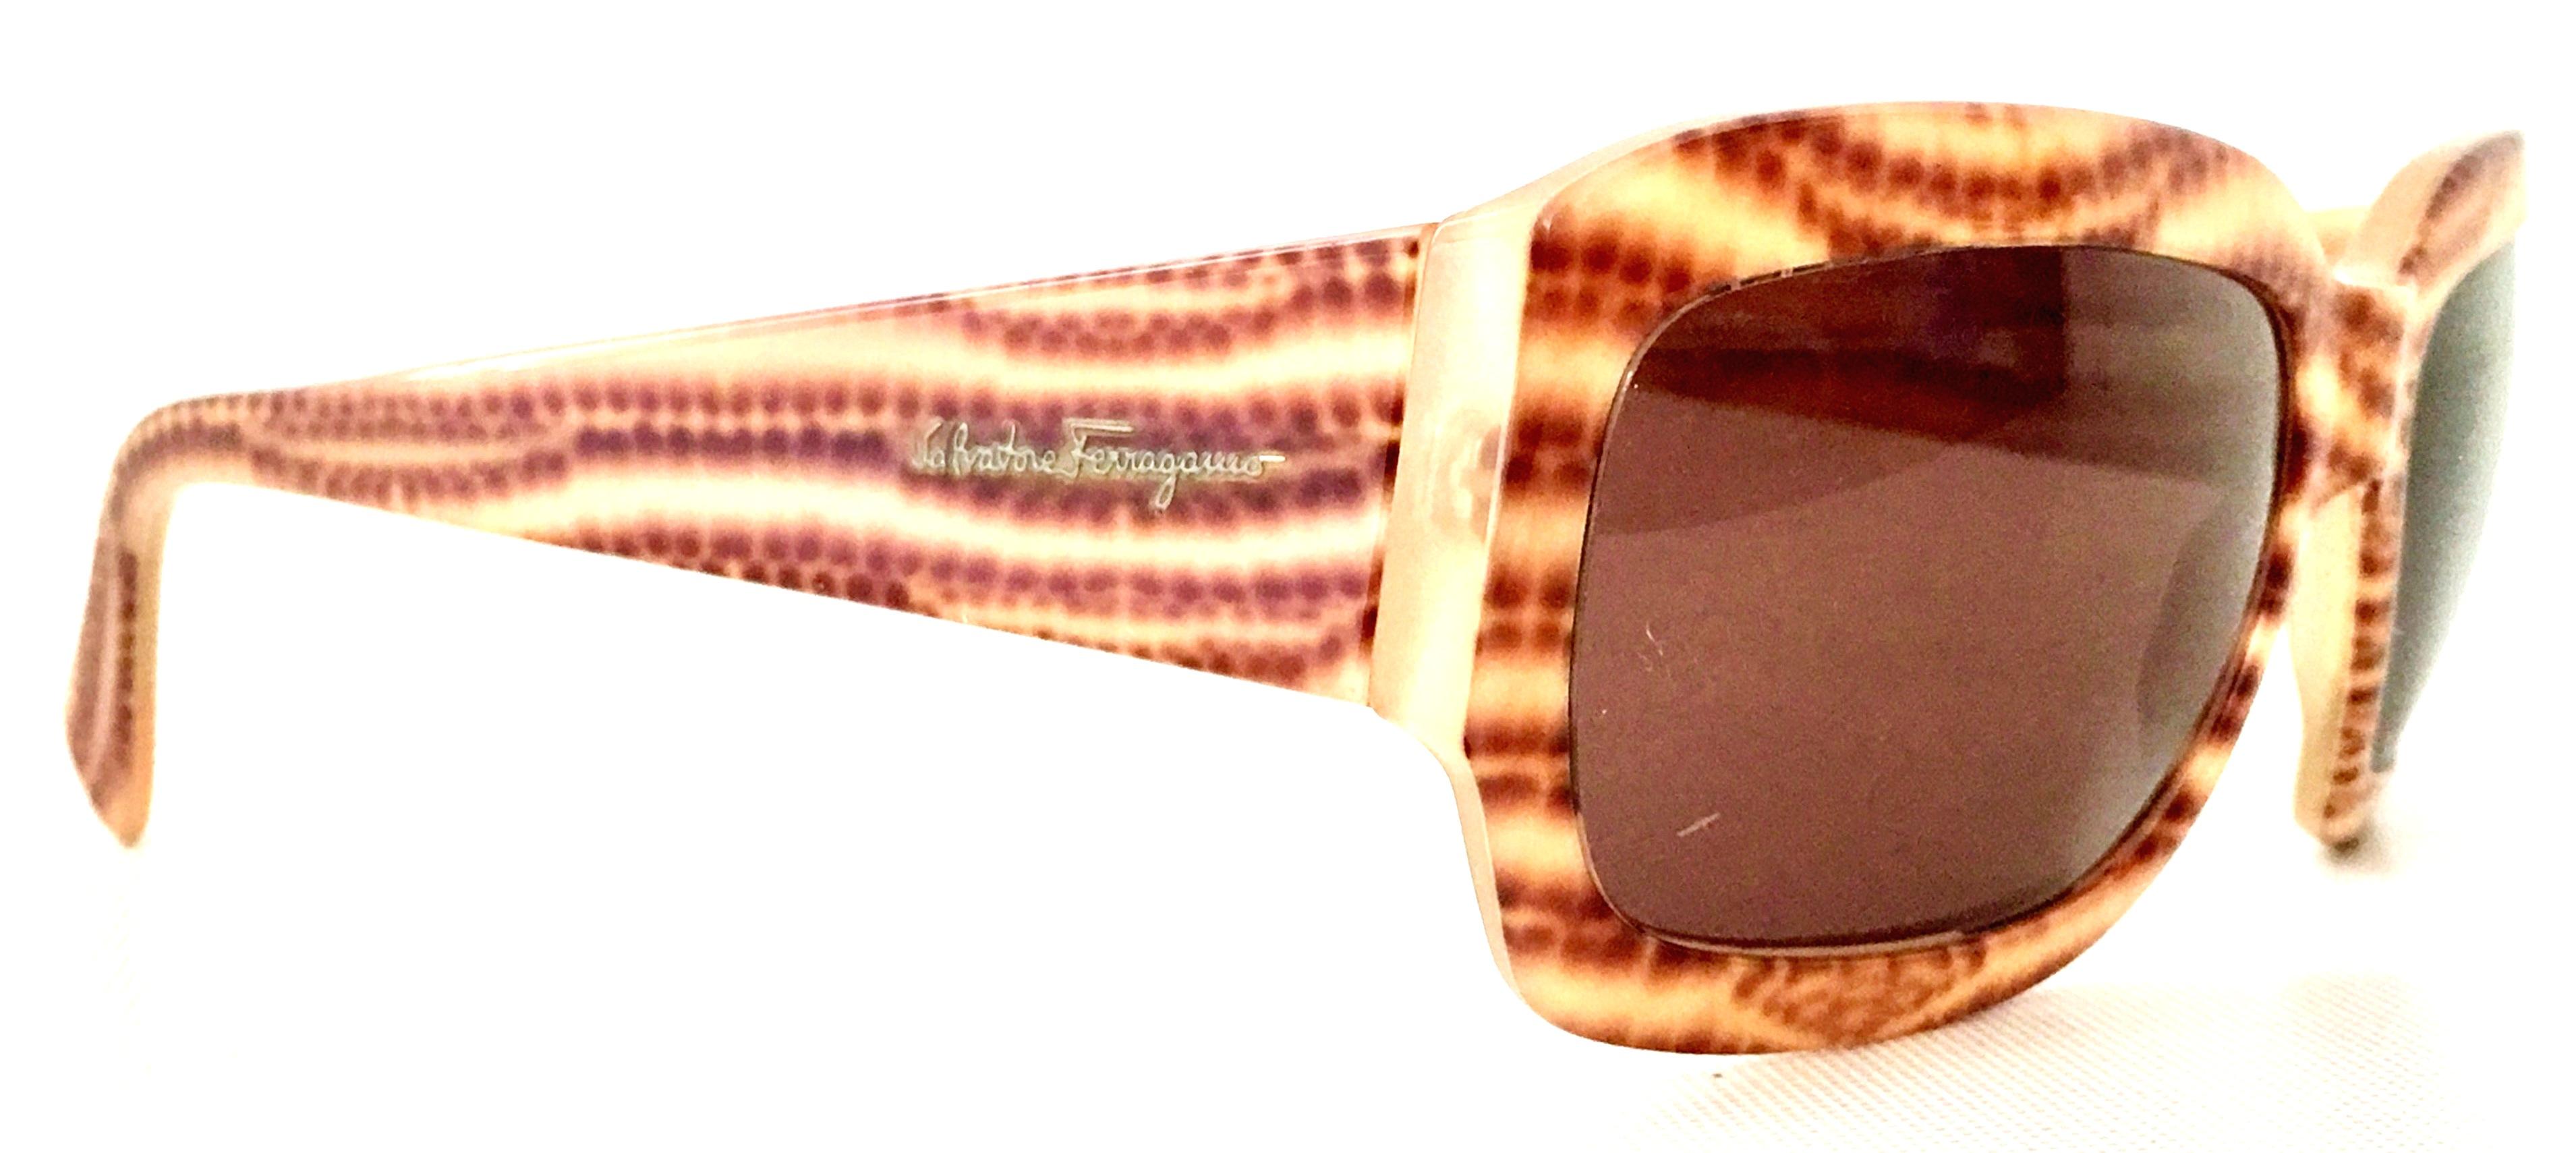 21st Century Salvatore Ferragamo abstract animal print sunglasses with original gift box. These acetate Ferragamo sunglasses Feature a subtle amethyst tinted lens with shades of brown animal print frames and the gold raised font logo at each